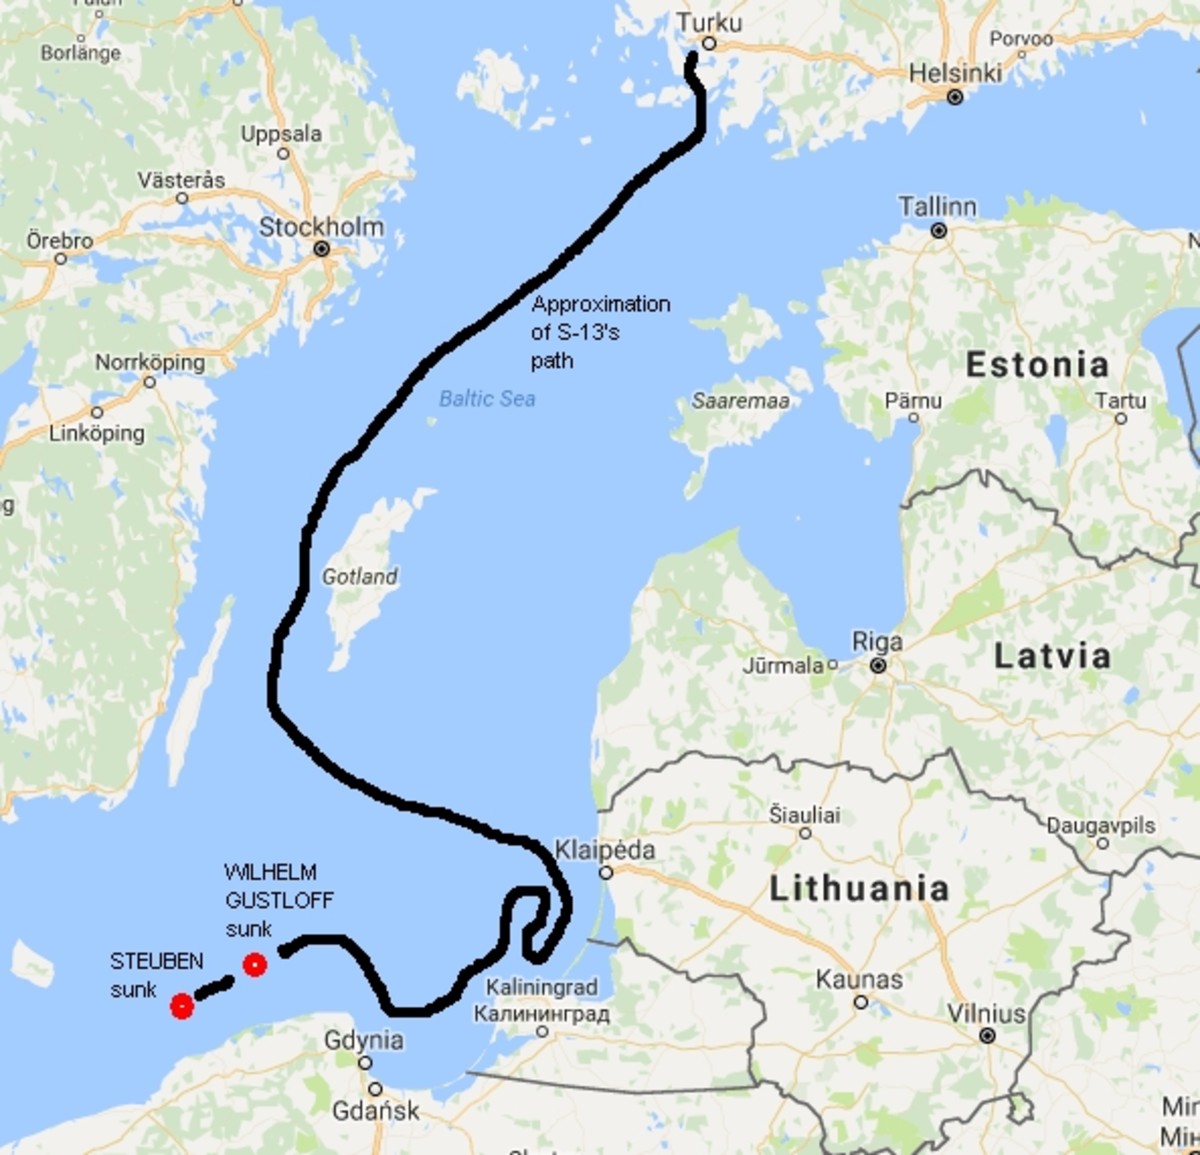 Approximations of the path taken by Soviet submarine "S-13" and the sinkings of the liners "Wilhelm Gustloff" and "Steuben" (Jan - Feb 1945)